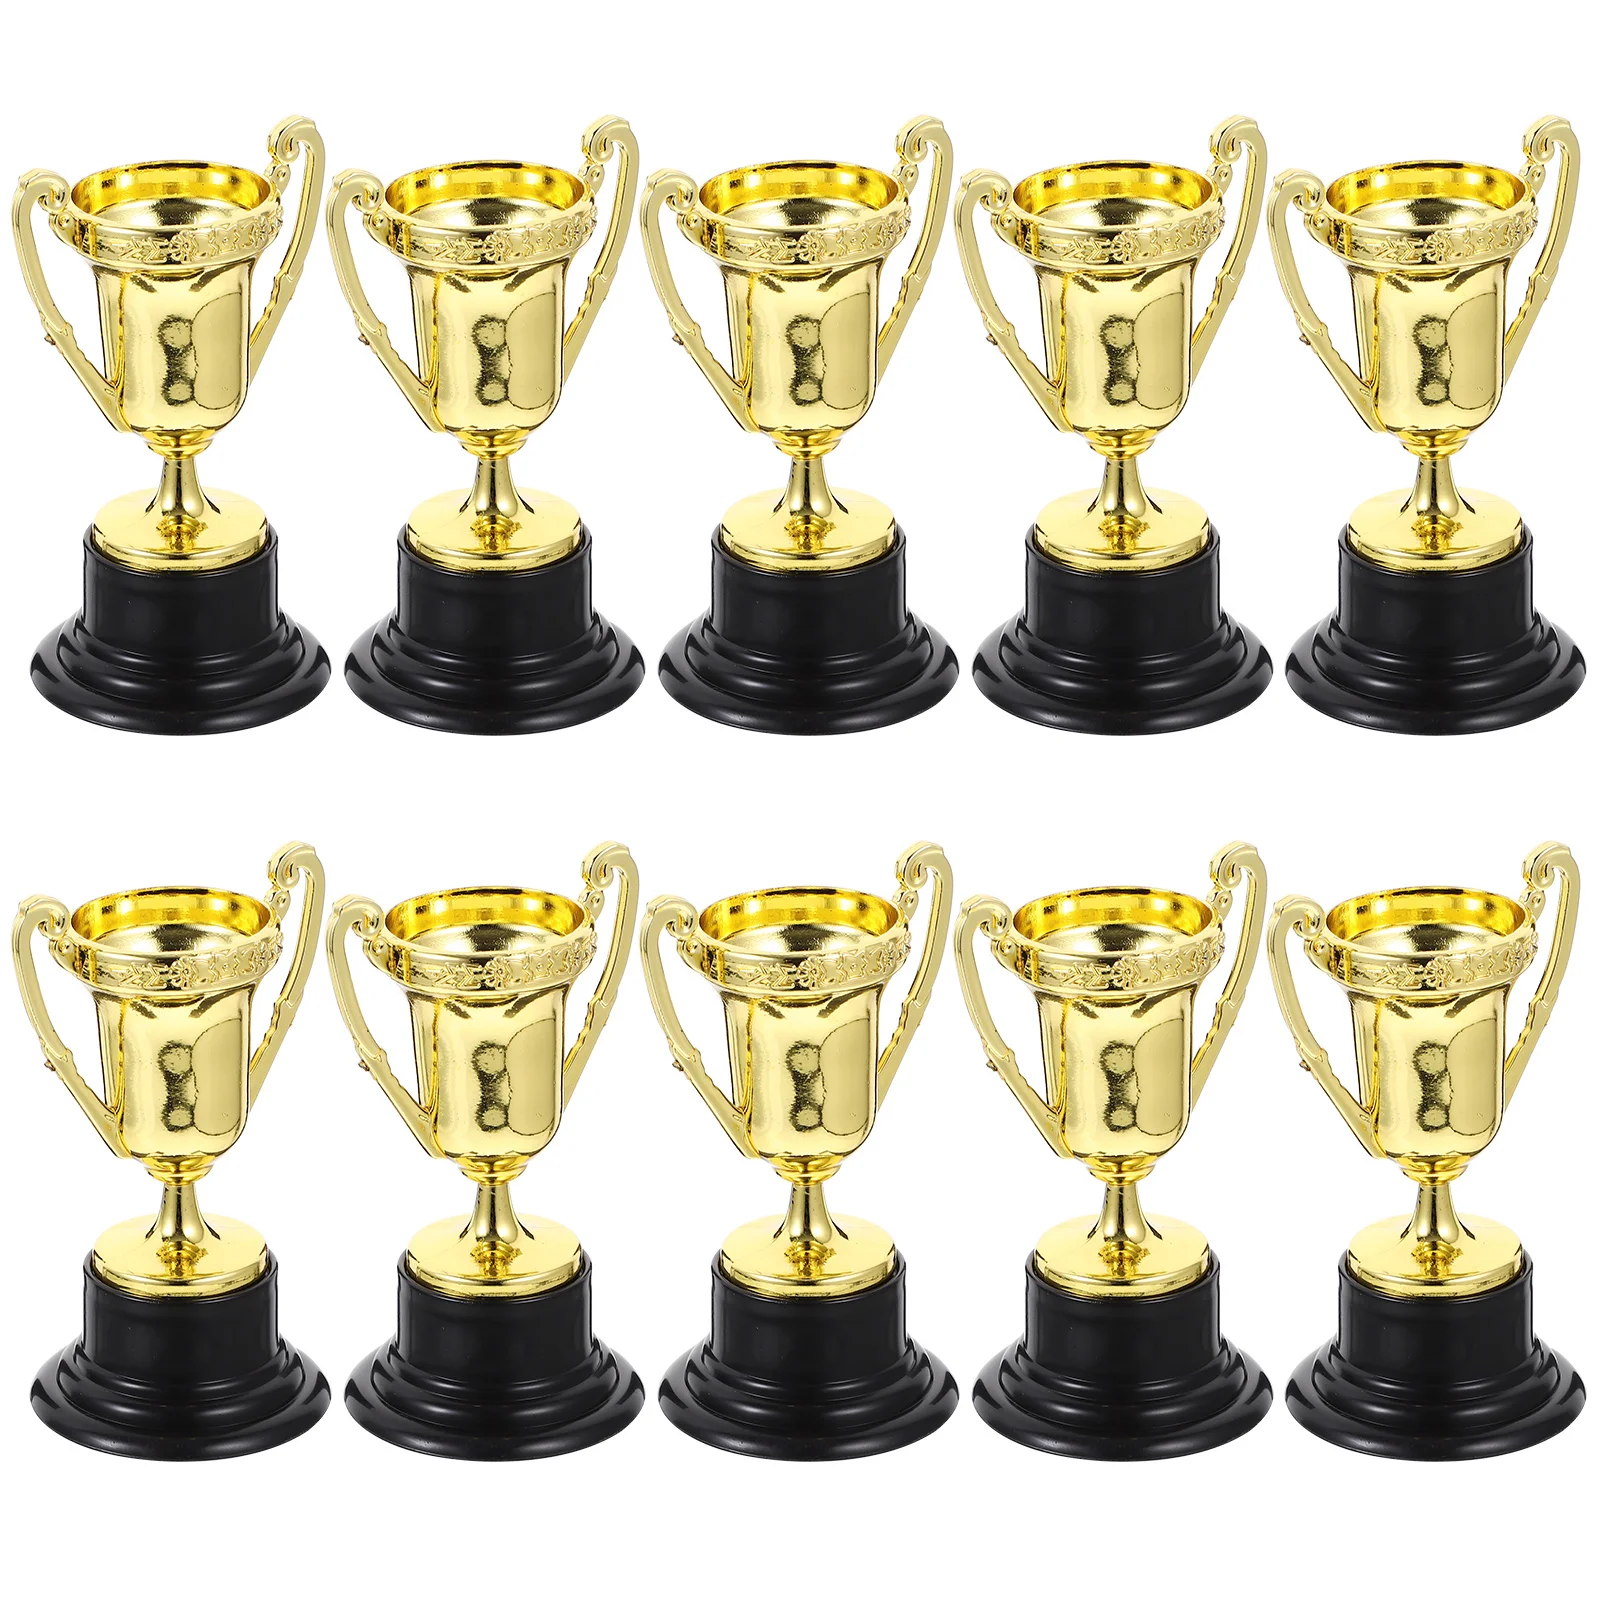 Trophy Trophys Kids Trophies Awards Mini Cup Reward Game Winner Medals Sports Basketball Competition Early Classic Prizes Gold